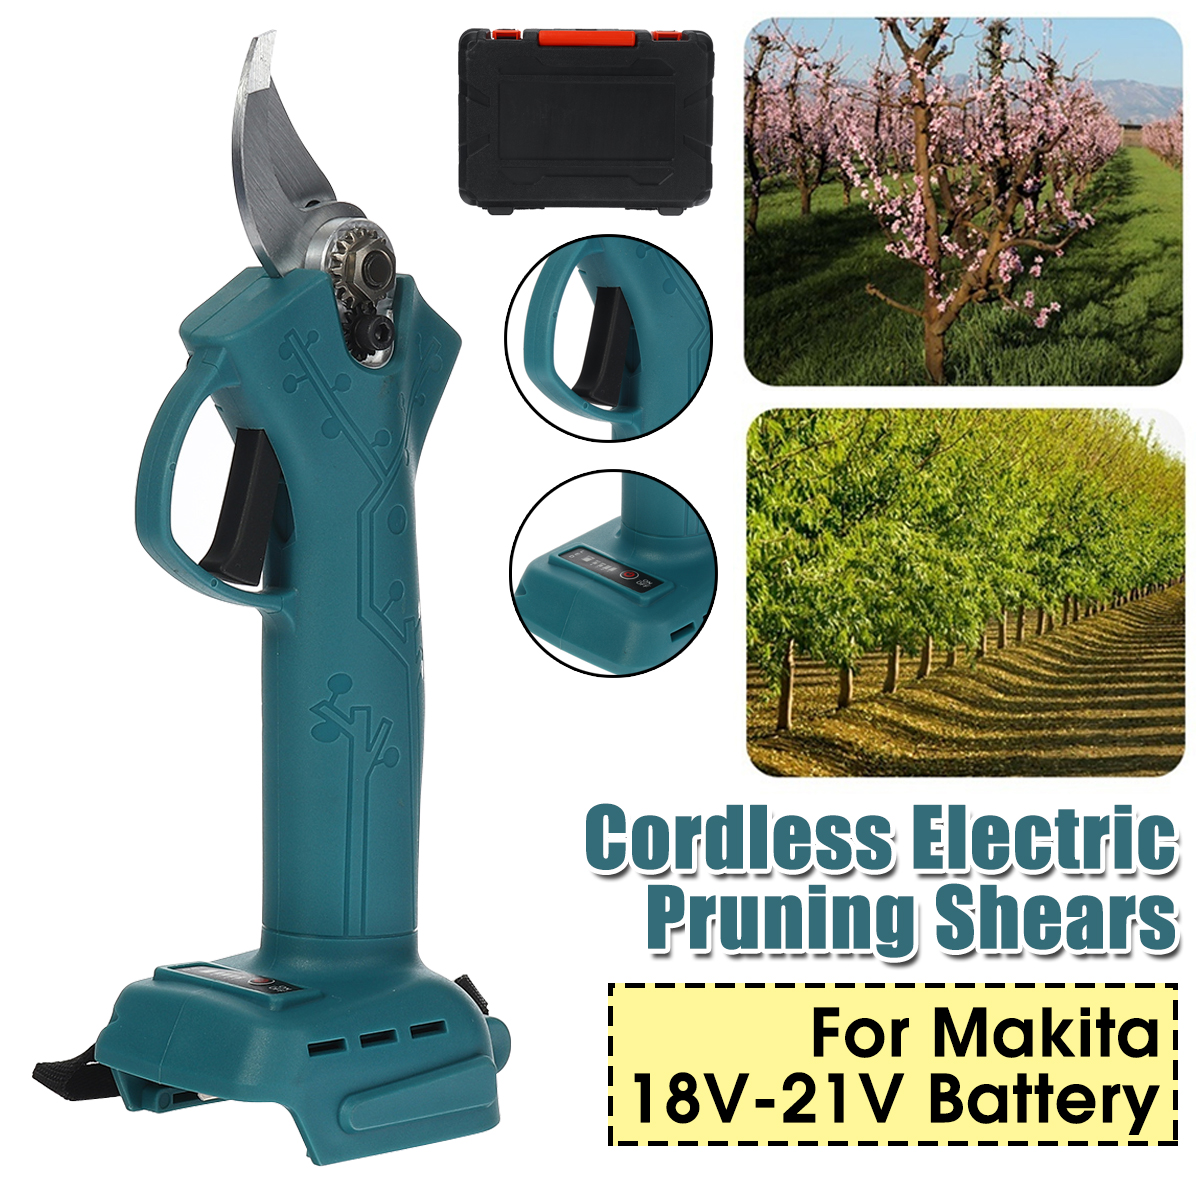 100W-Cordless-Secateur-Electric-Branch-Cutter-Shears-Pruning-For-Makita-18V-21V-Battery-1754677-1